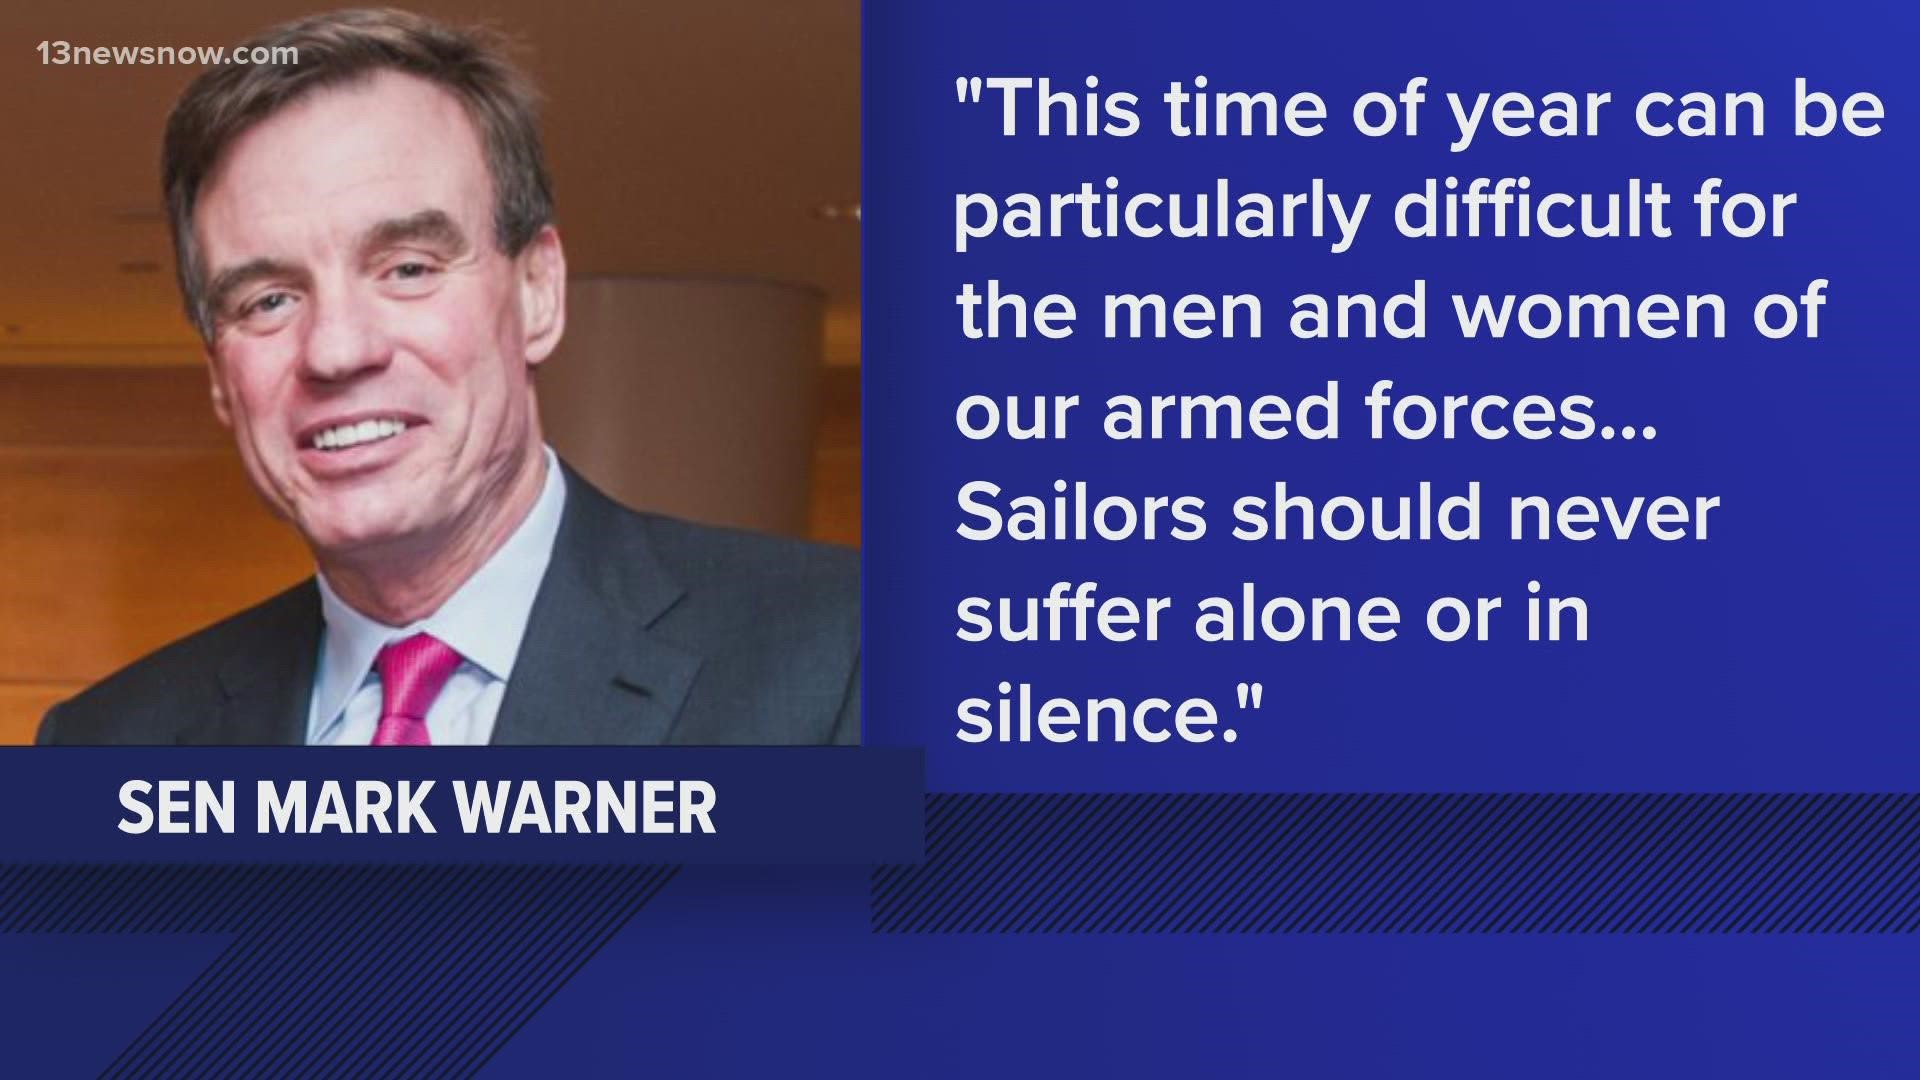 Virginia Sens. Mark Warner and Tim Kaine spoke out Monday night about the deaths of three Norfolk-based Navy sailors.